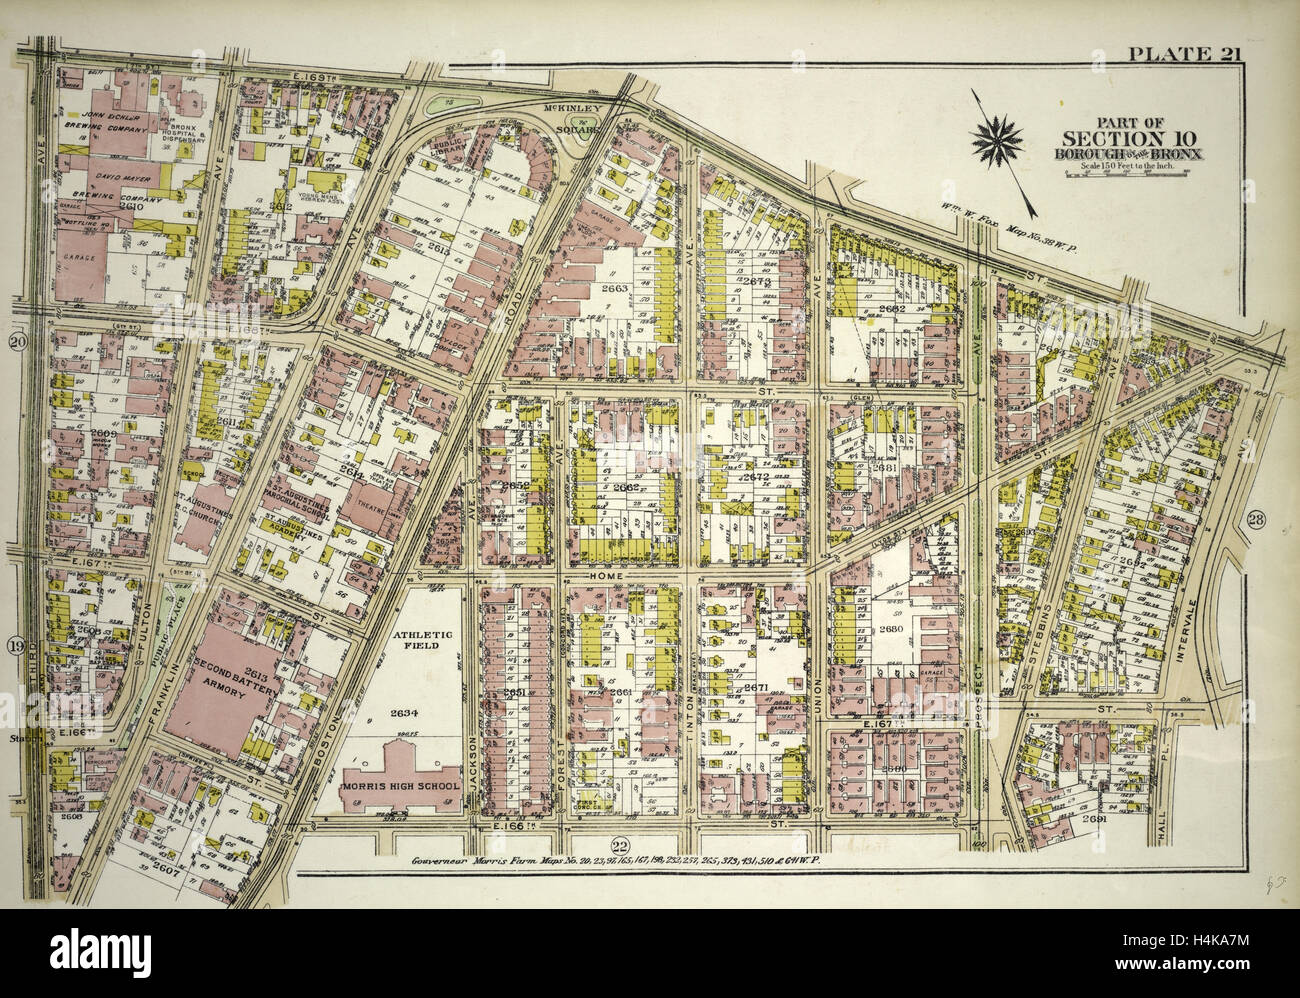 Plate 21, Part of Section 10, Borough of the Bronx. Bounded by E. 169th Street, Intervale Avenue, E. 166th Street Stock Photo